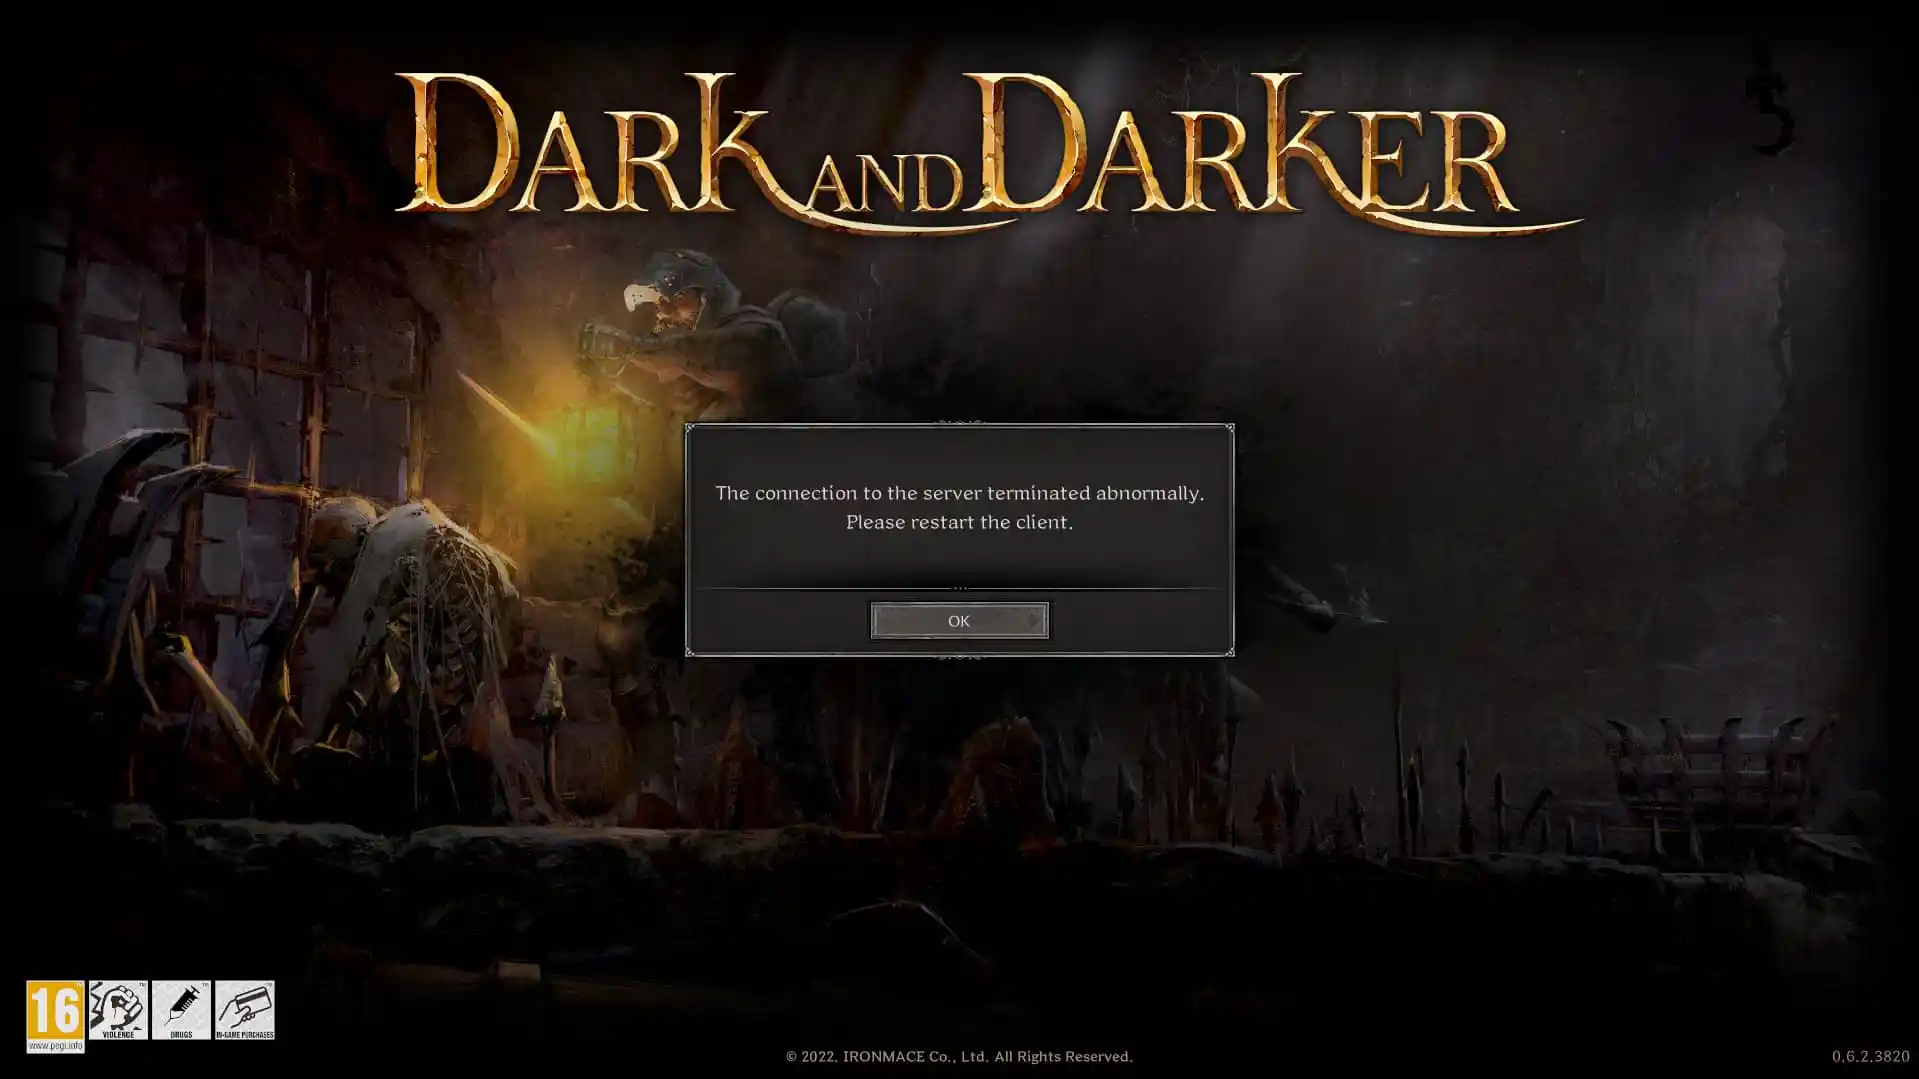 The connection to the server terminated abnormally, Please restart the client error message in Dark and Darker.